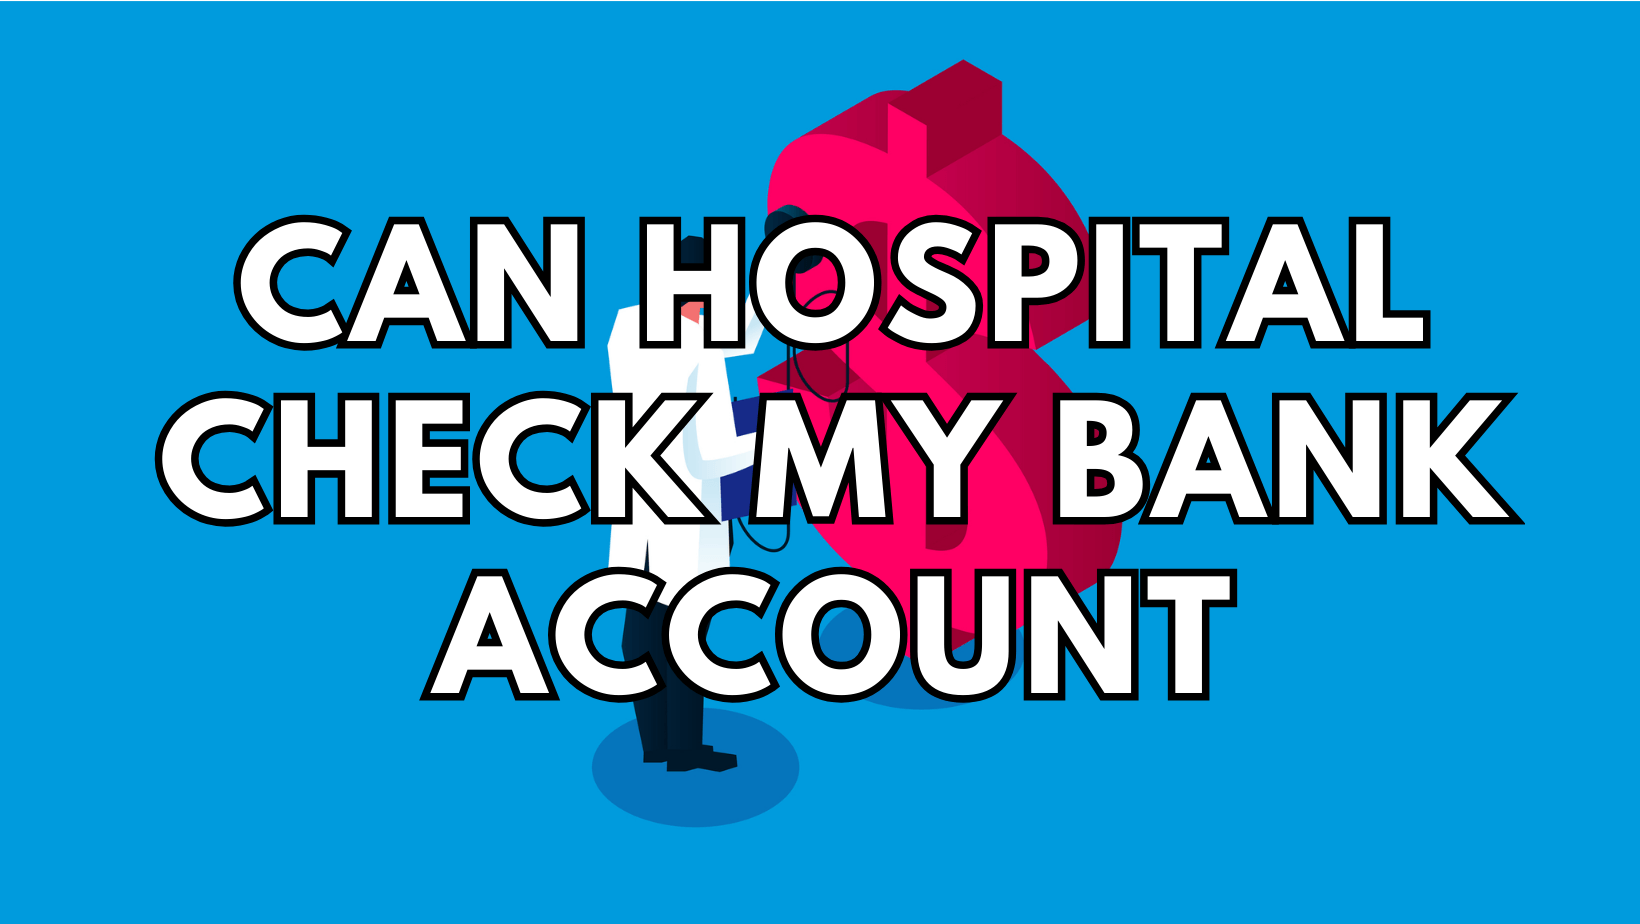 can hospital check my bank account featured image